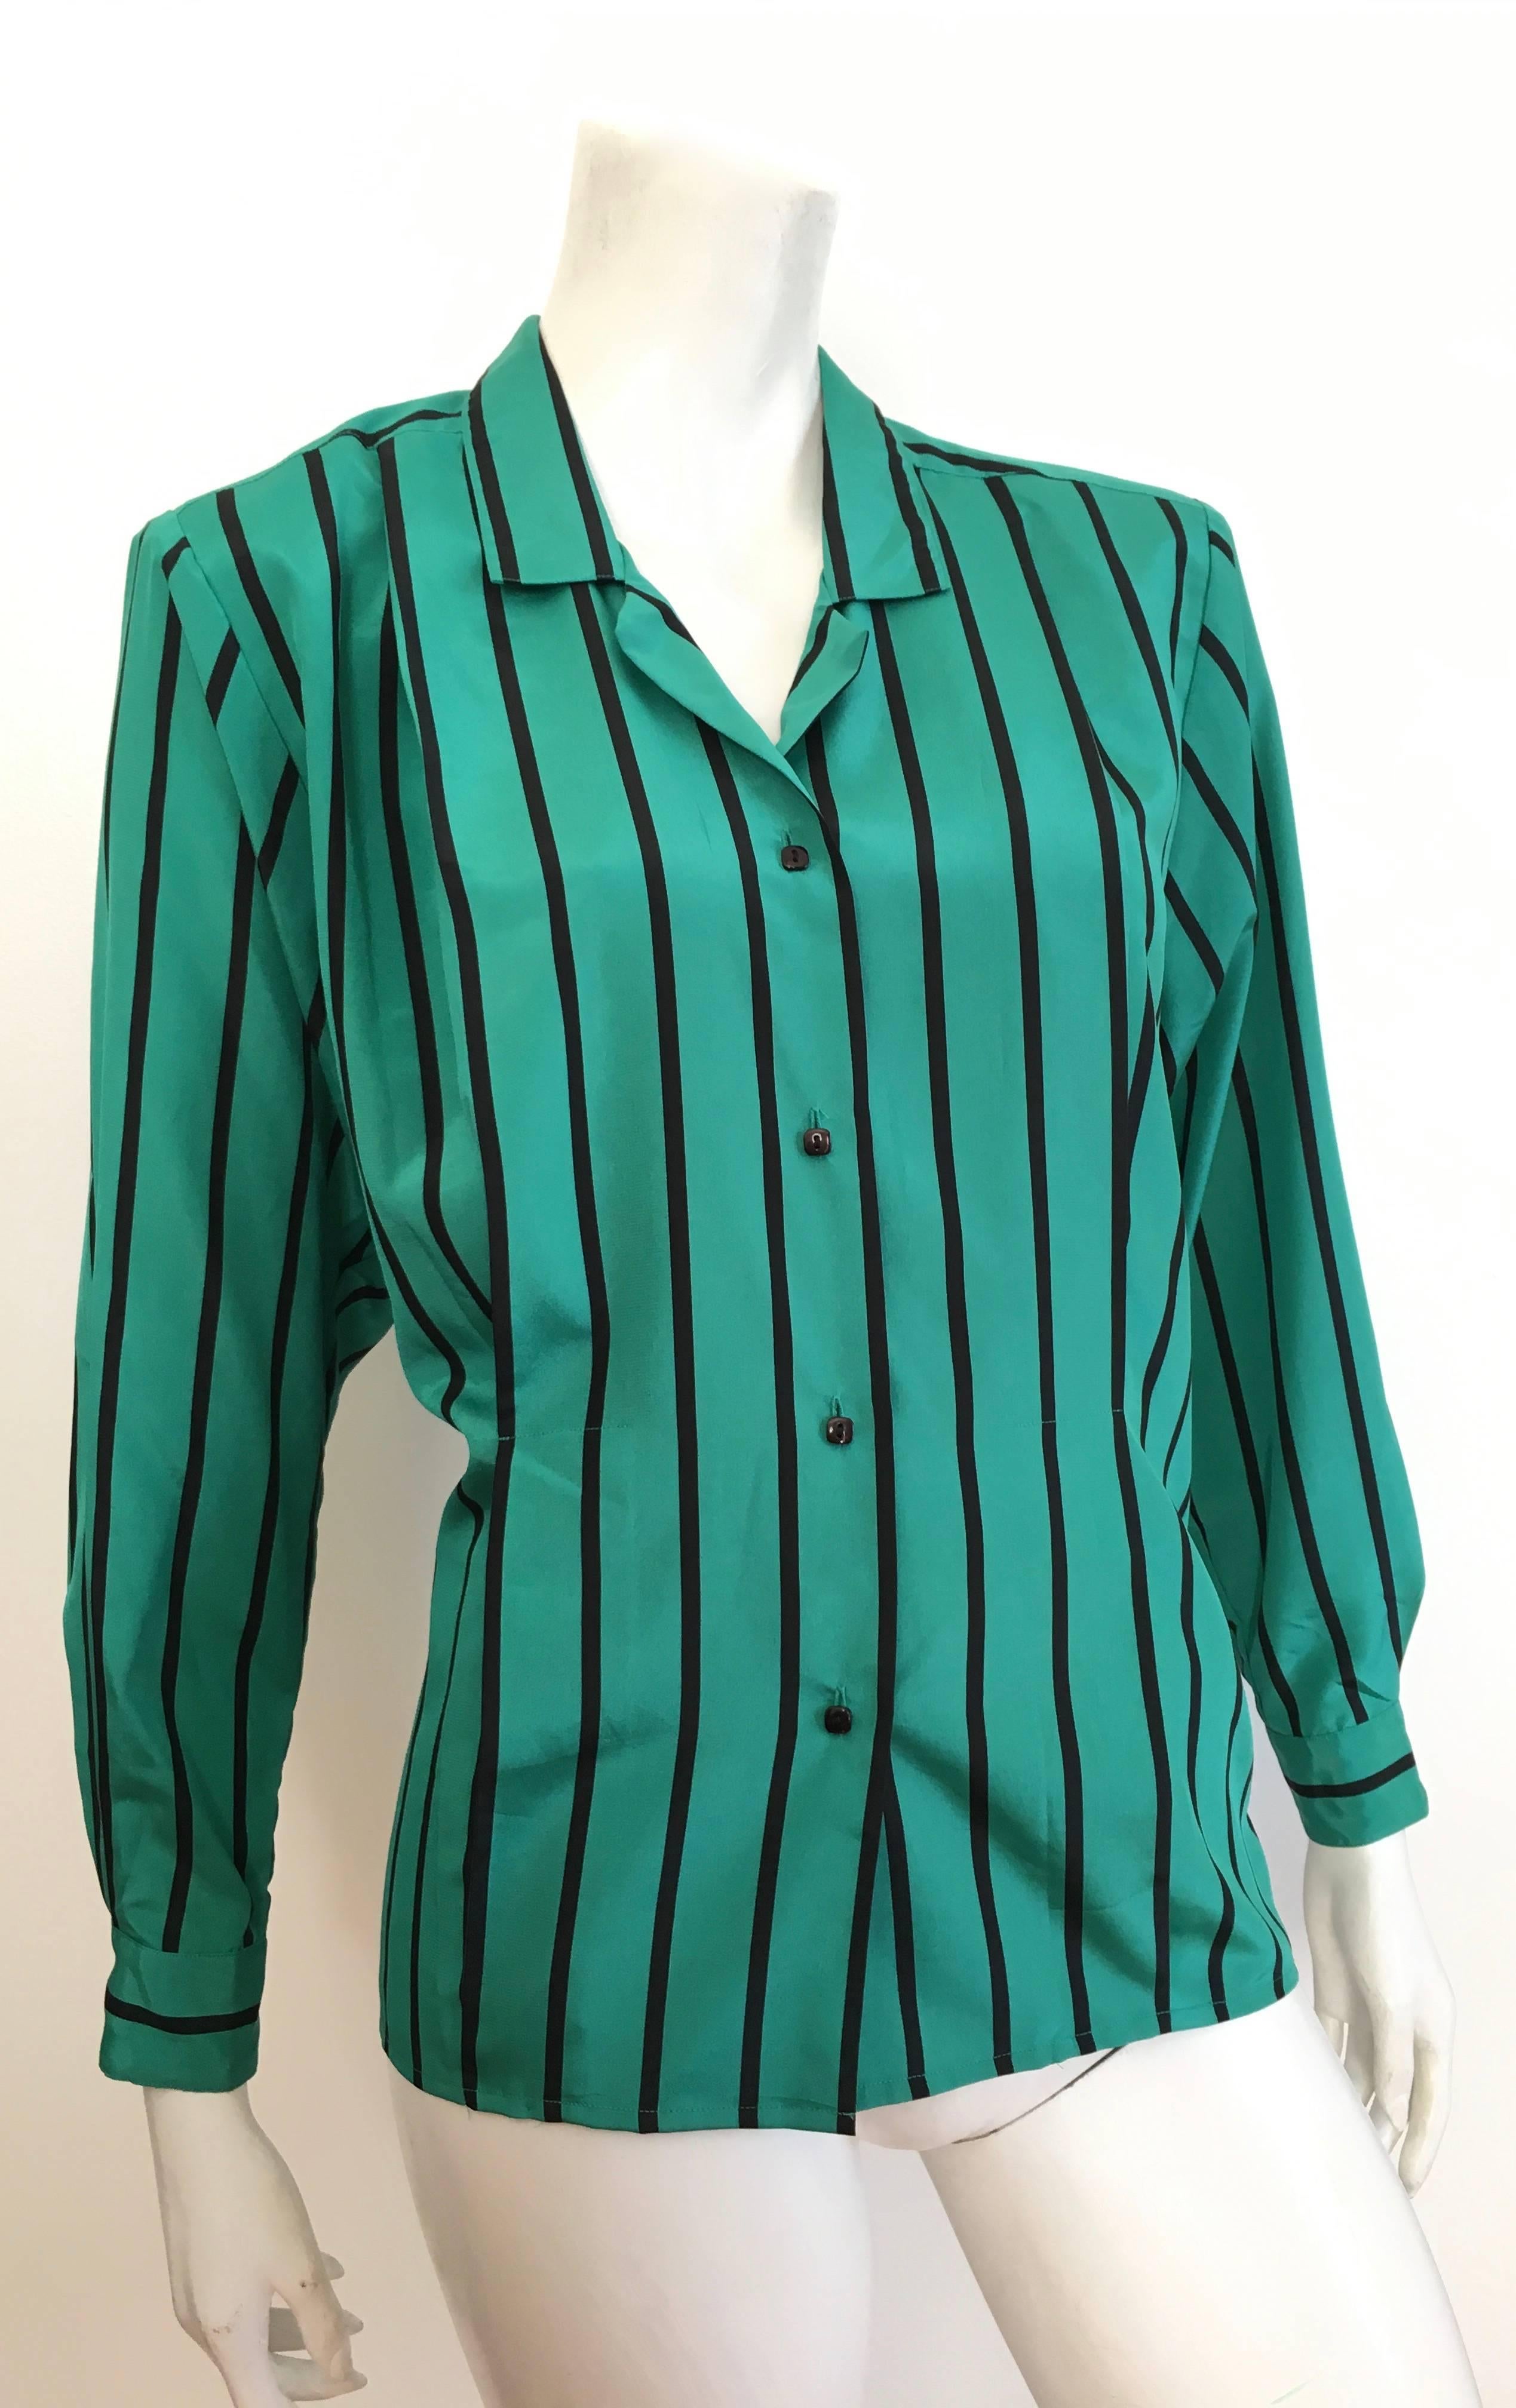 Geoffrey Beene 1980s green & black striped long sleeve blouse is a size 6. Blouse has very mild shoulder pads that can be removed if desired. There are two inverted pleats on each side of front of blouse. Wear this 1980s Geoffrey Beene blouse with